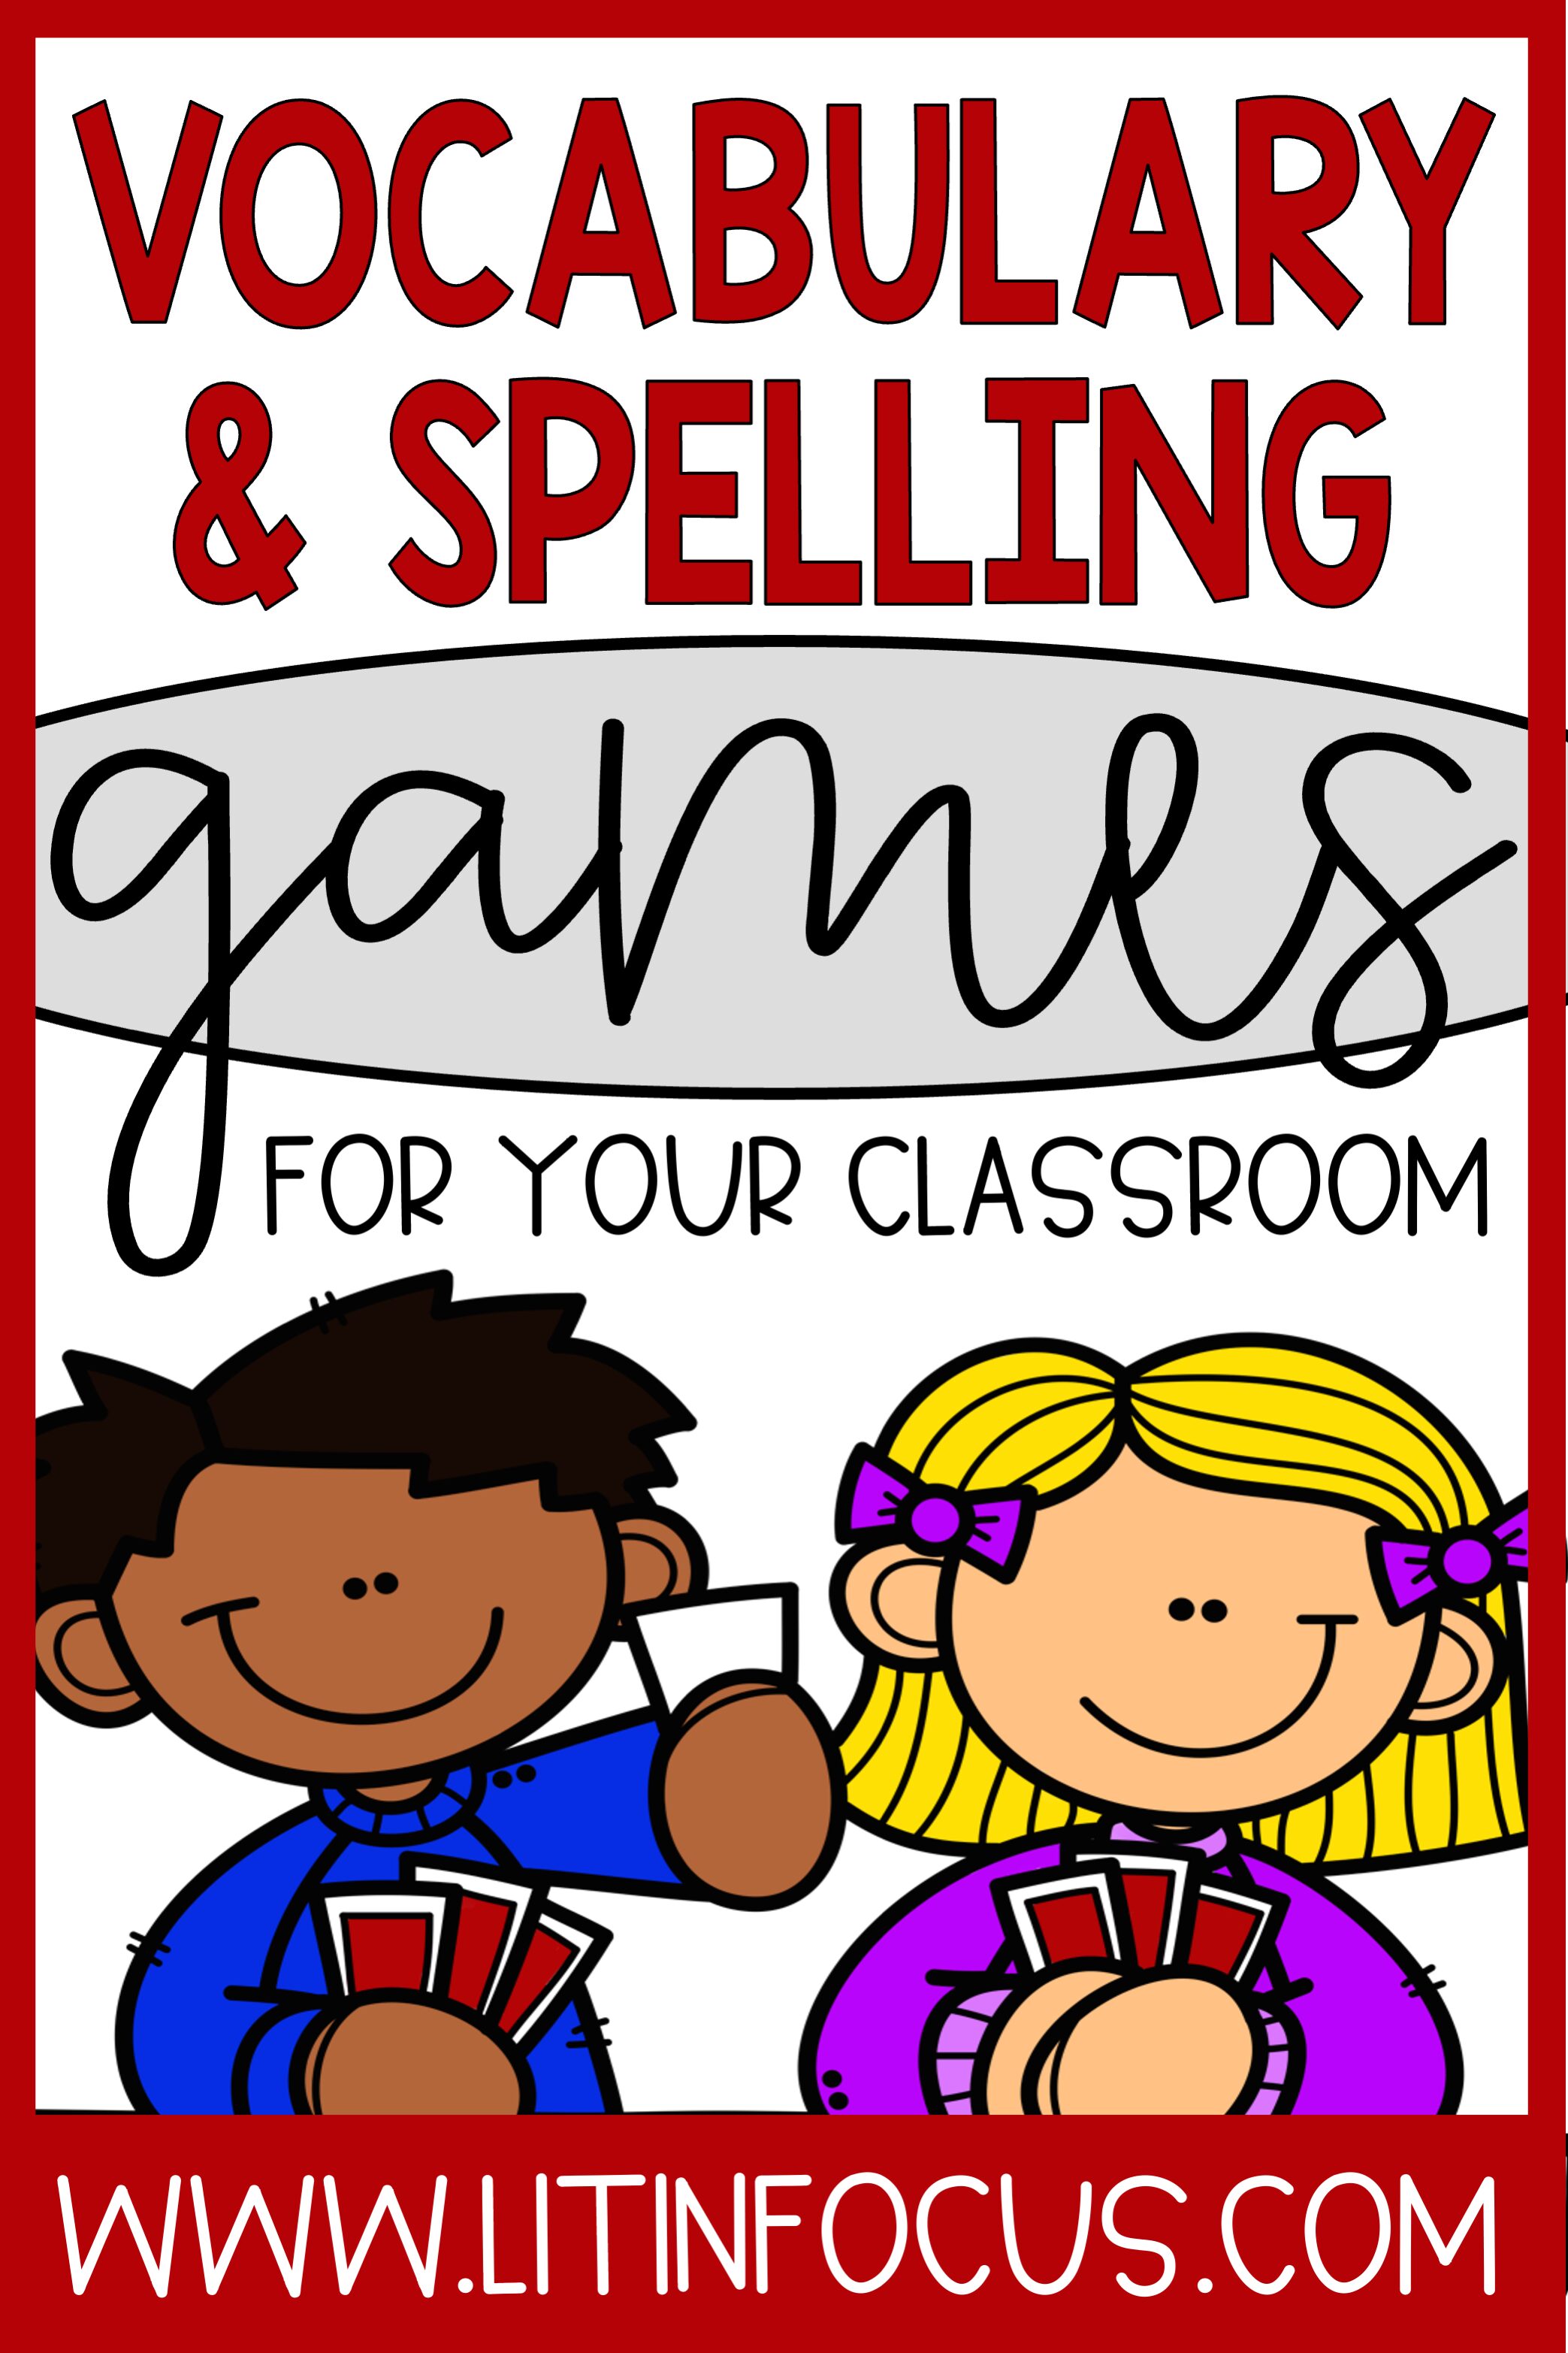 Spelling and Vocabulary Games and Activities For Your Classroom